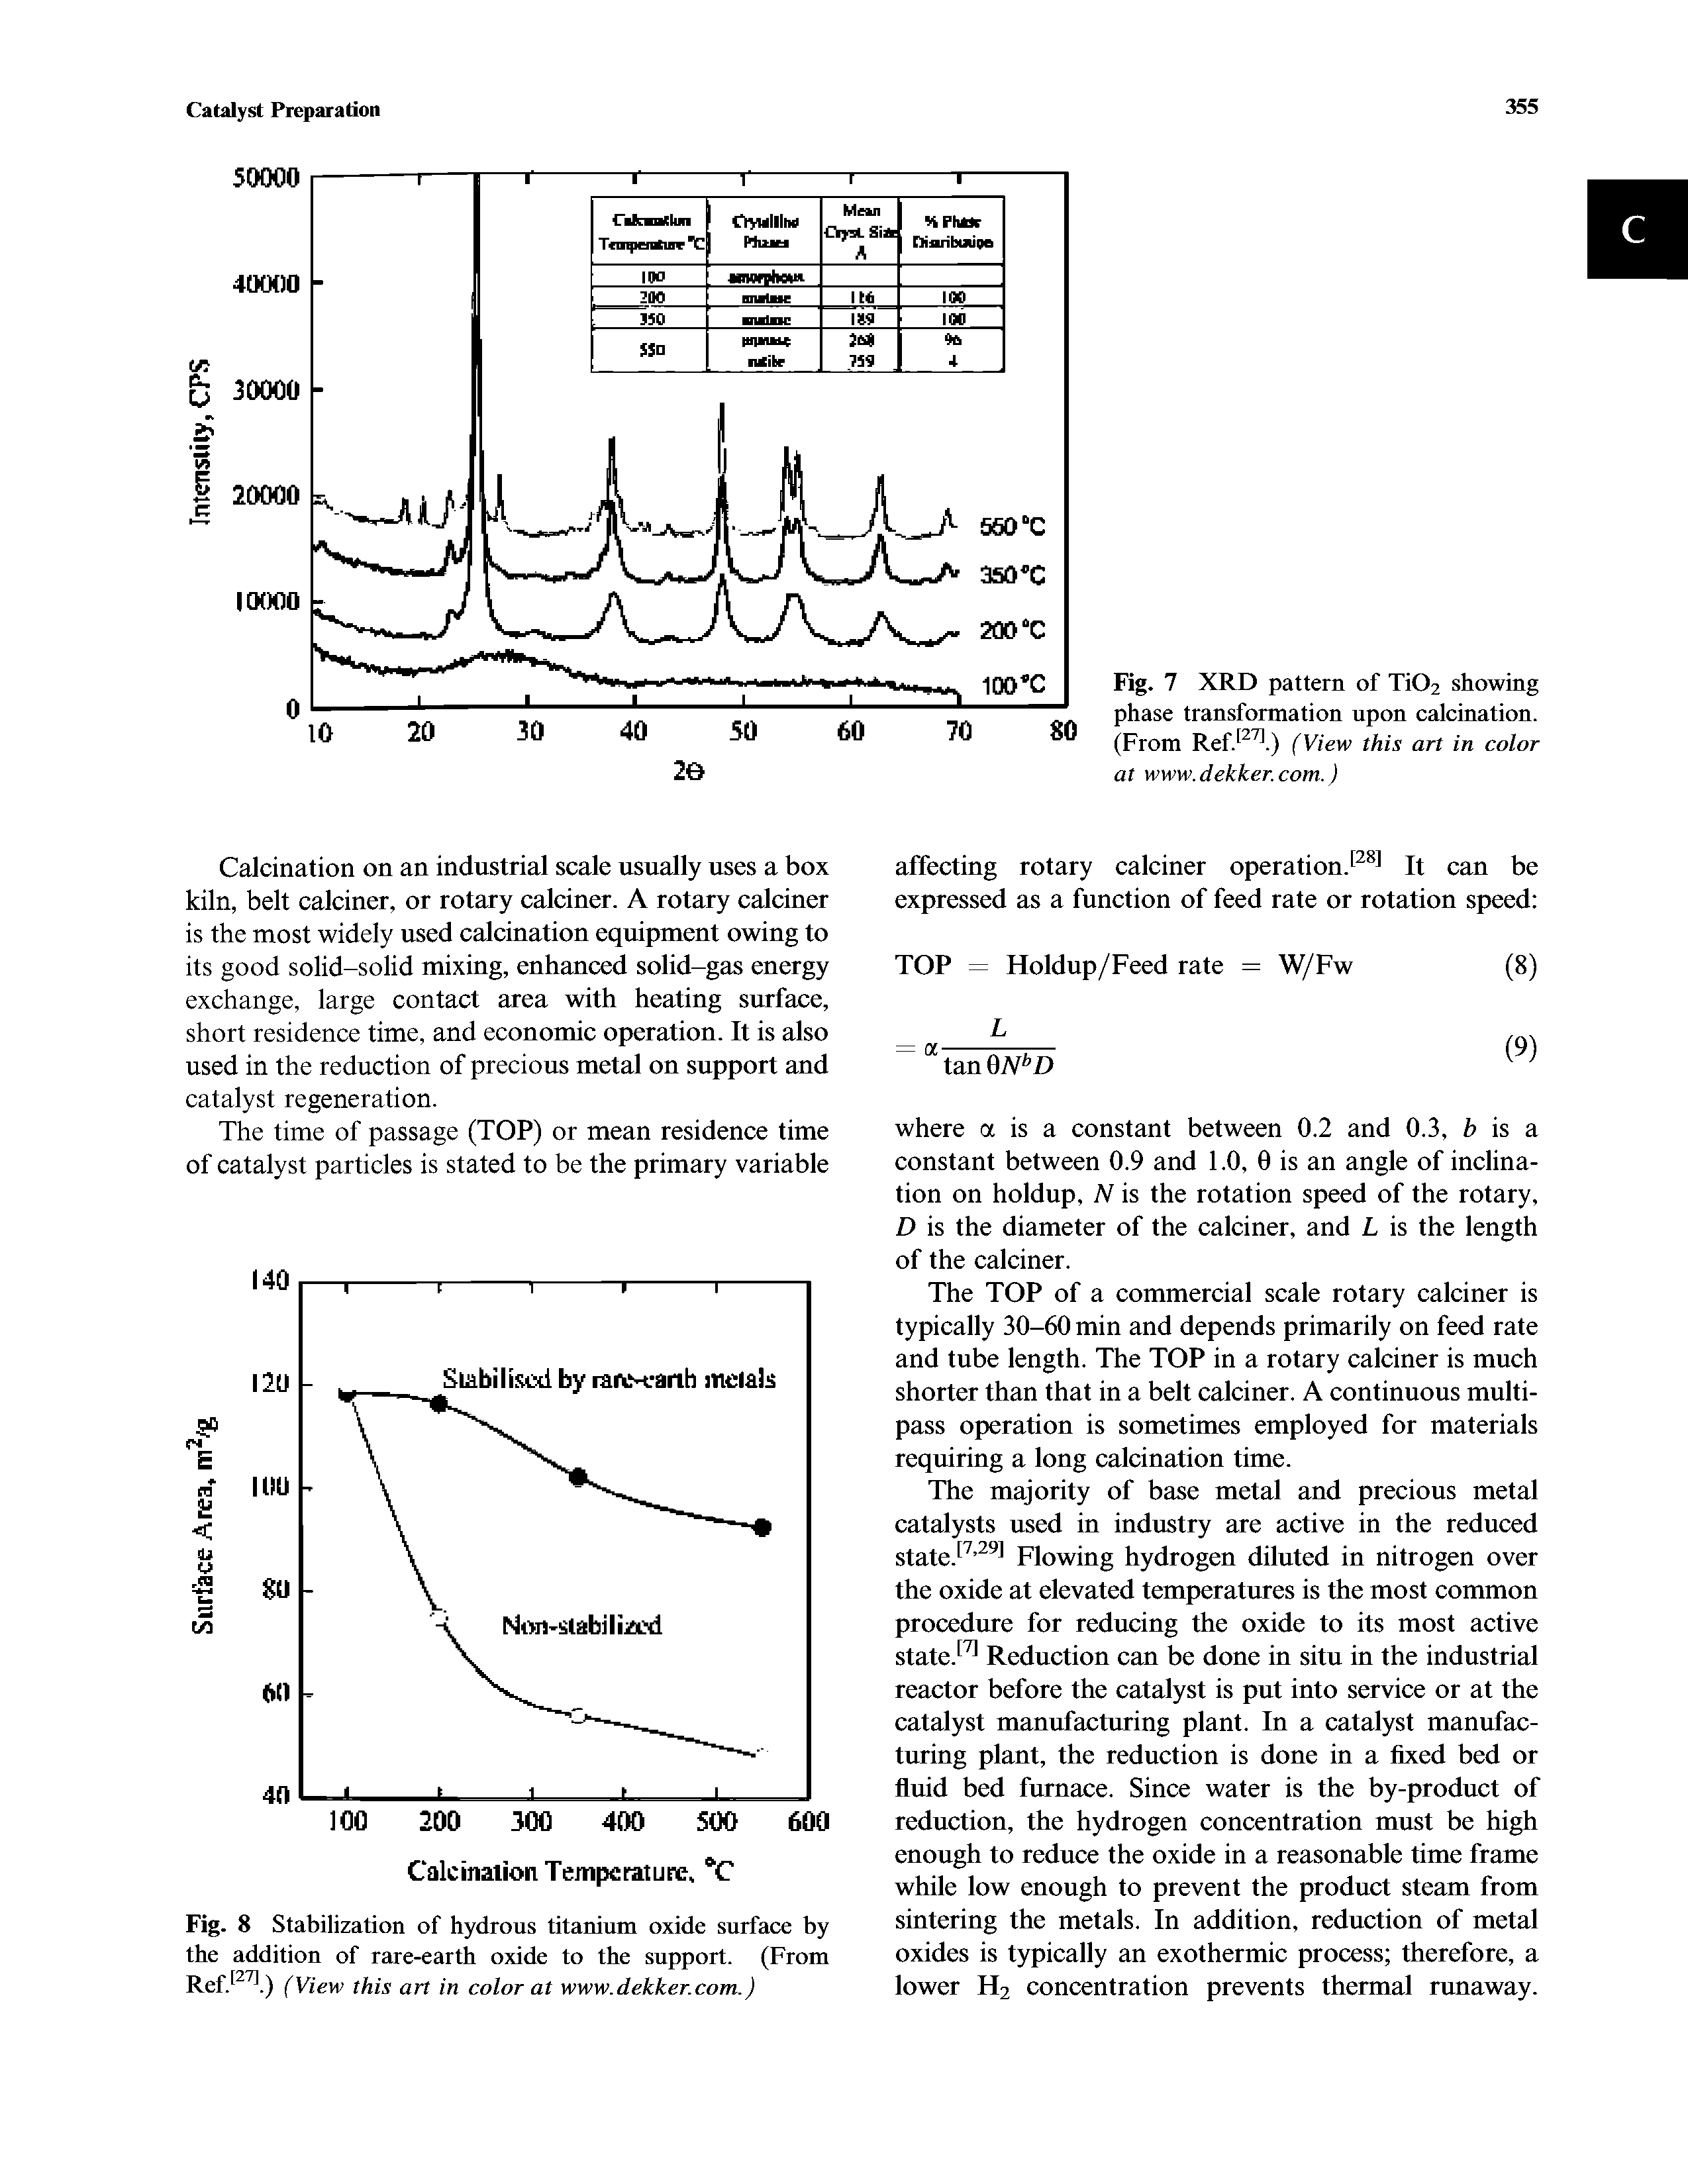 Fig. 8 Stabilization of hydrous titanium oxide surface by the addition of rare-earth oxide to the support. (From Ref.. ) (View this art in color at www.dekker.com.)...